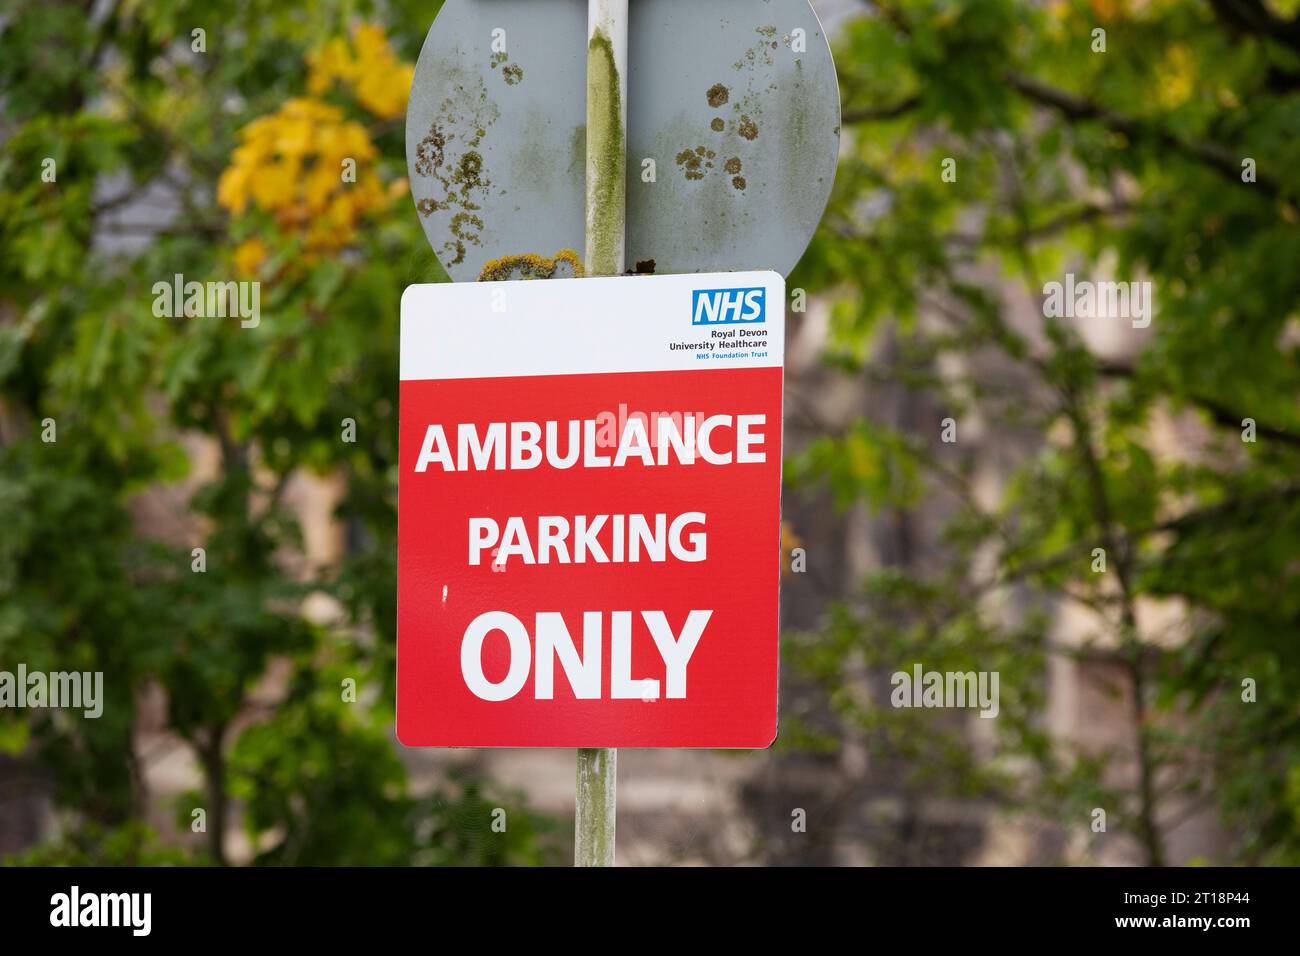 Ambulance parking ONLY red NHS sign on pole with blurred tree branches in background Stock Photo